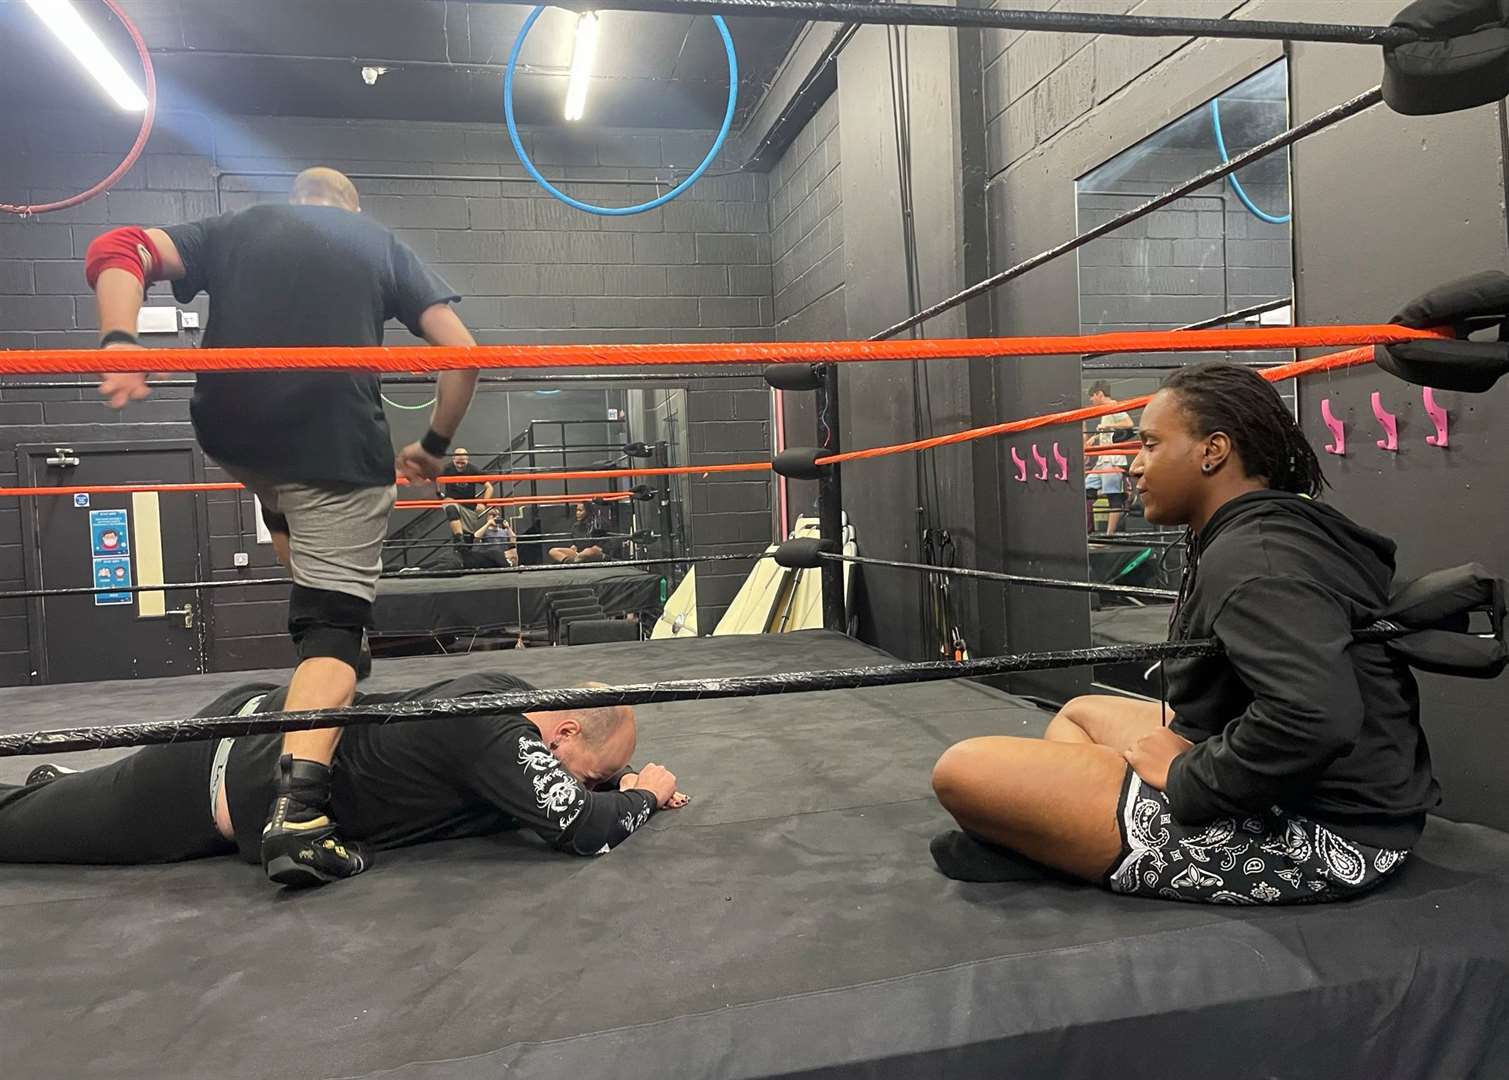 Ayshea watches on as Boo and one of the trainees practice